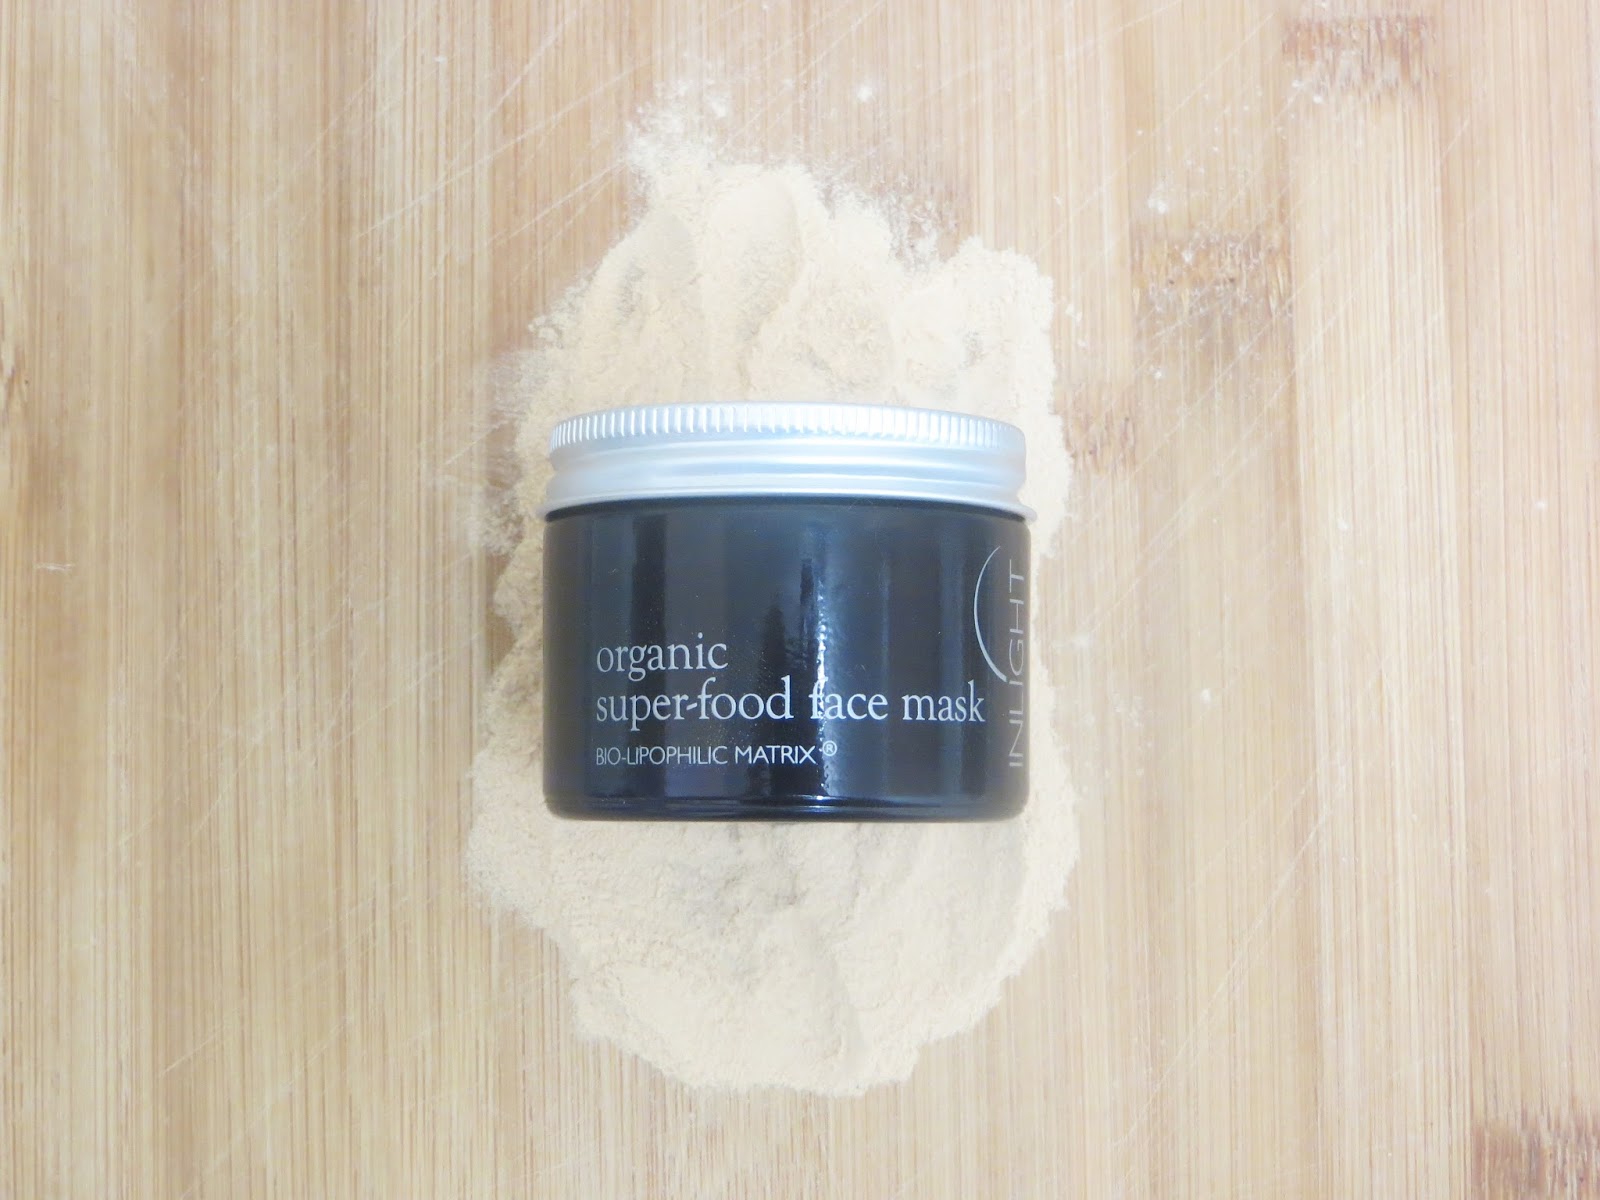 Inlight Organic Superfood Face Mask Review